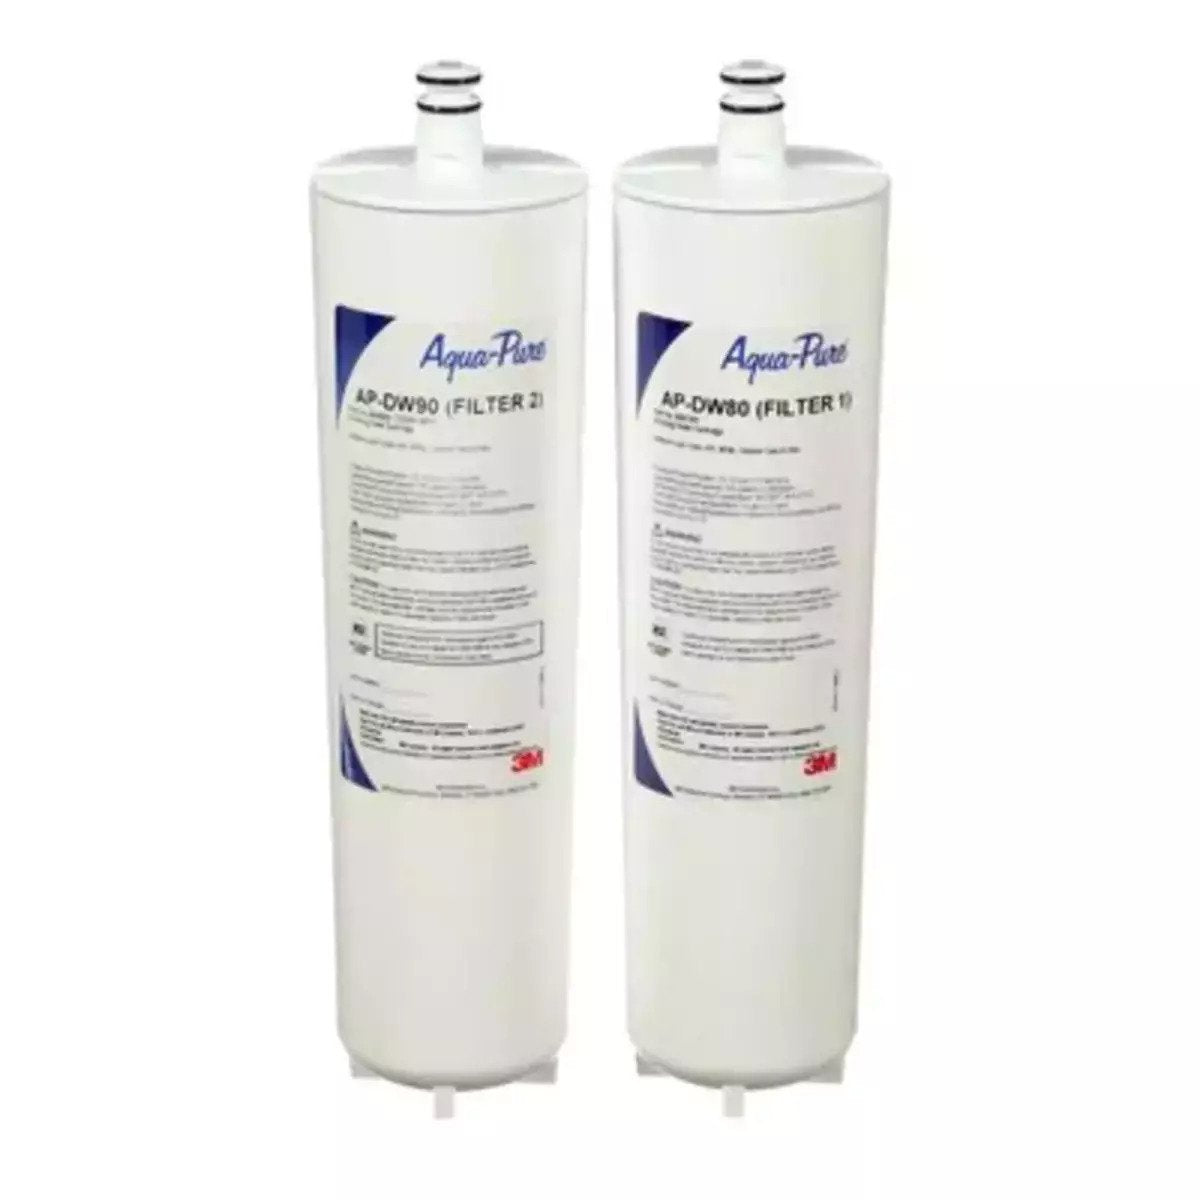 3M Aqua-Pure APDW80/90 Drinking Water Replacement Filter Set